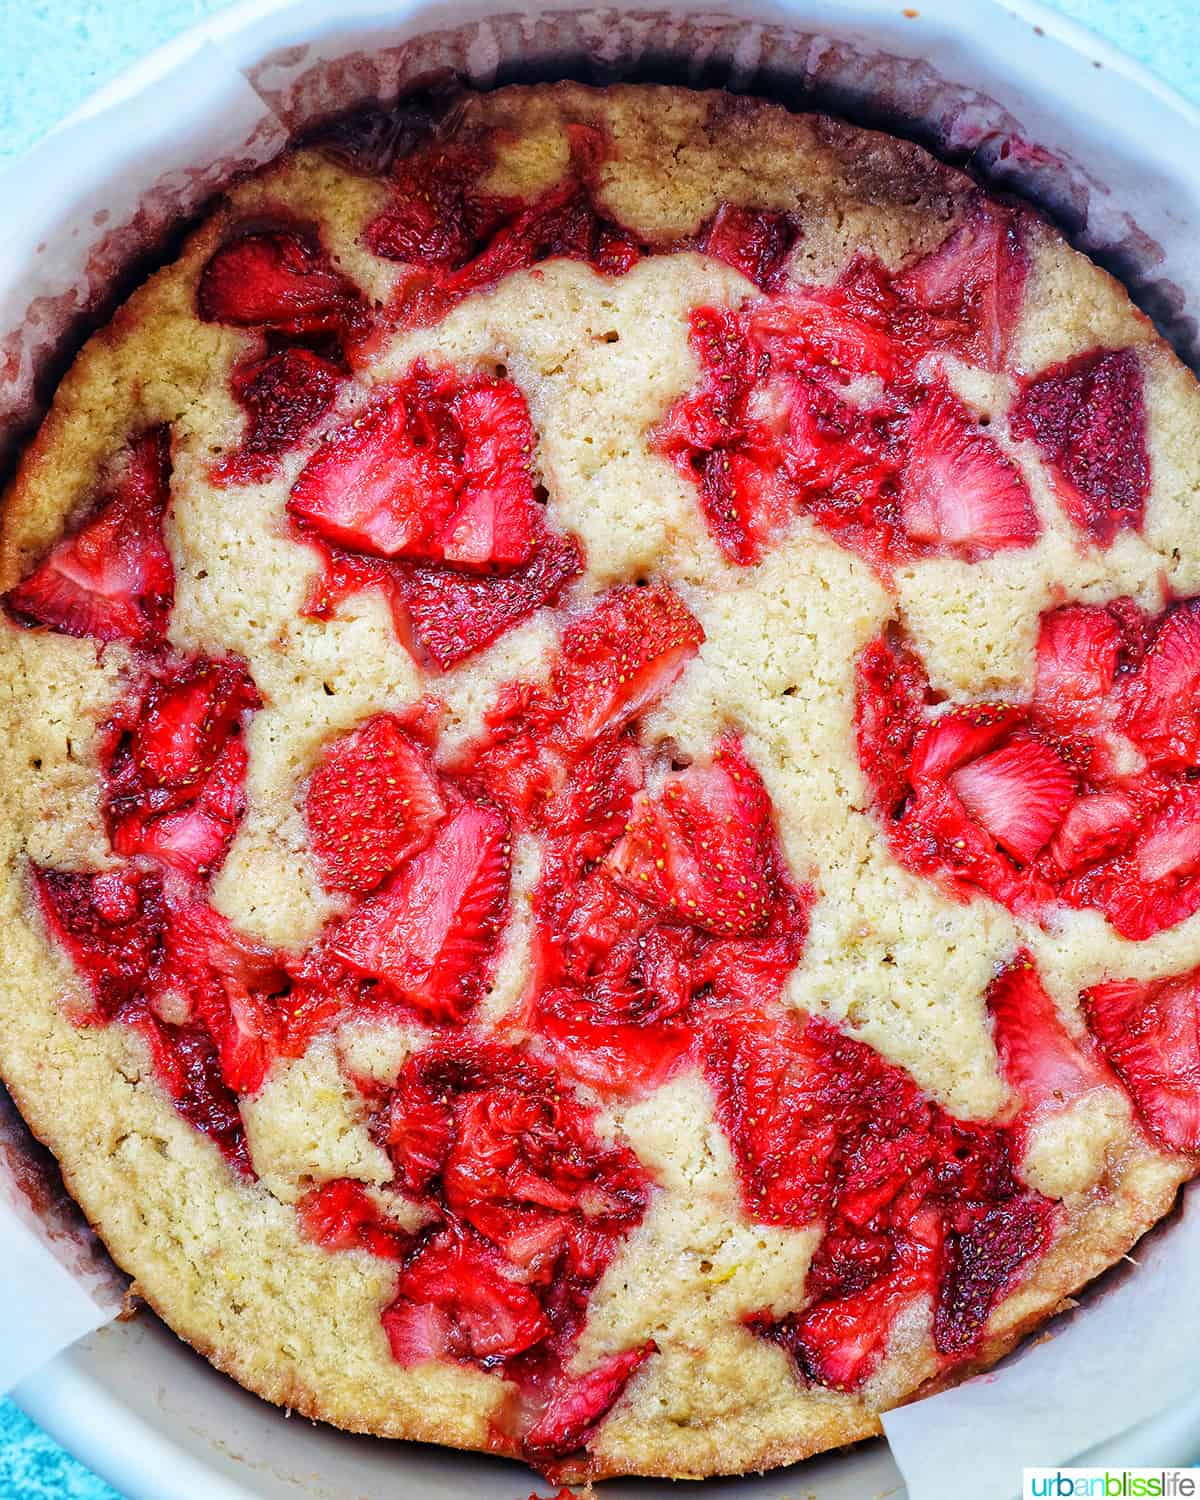 Strawberry Spoon Cake just out of the oven.